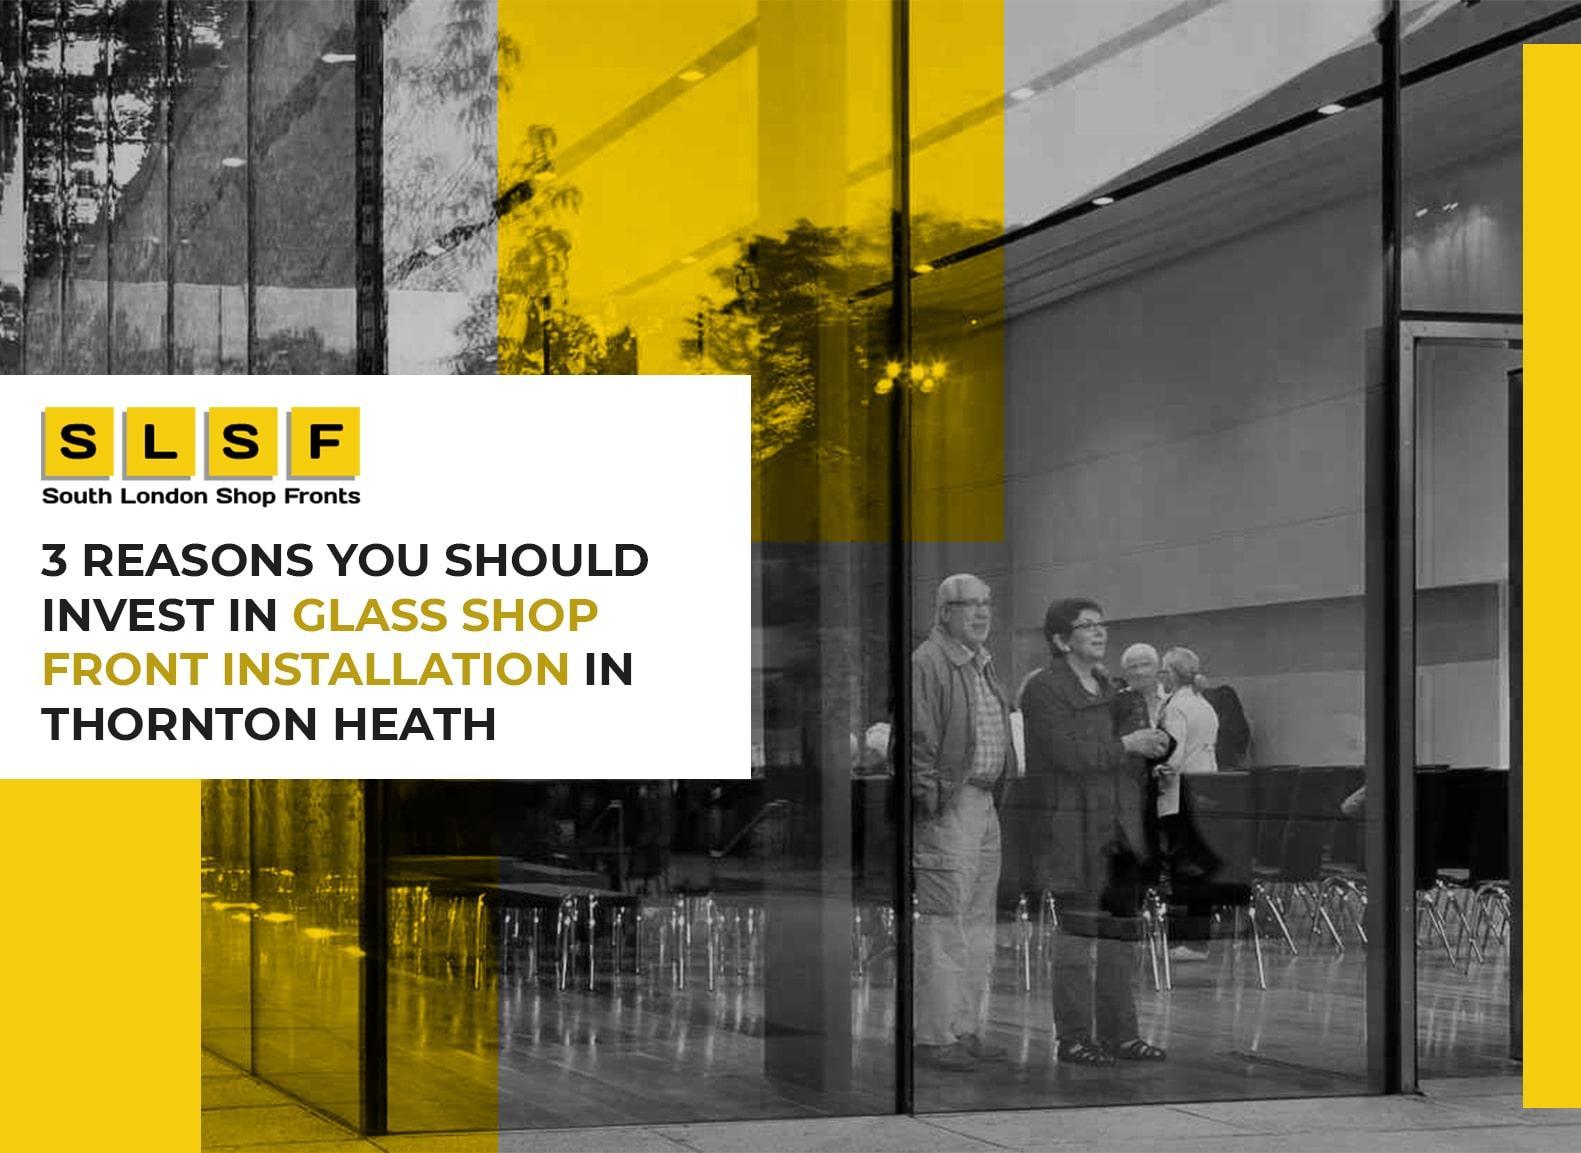 3 Reasons You Should Invest in Glass Shop Front Installation in Thornton Heath